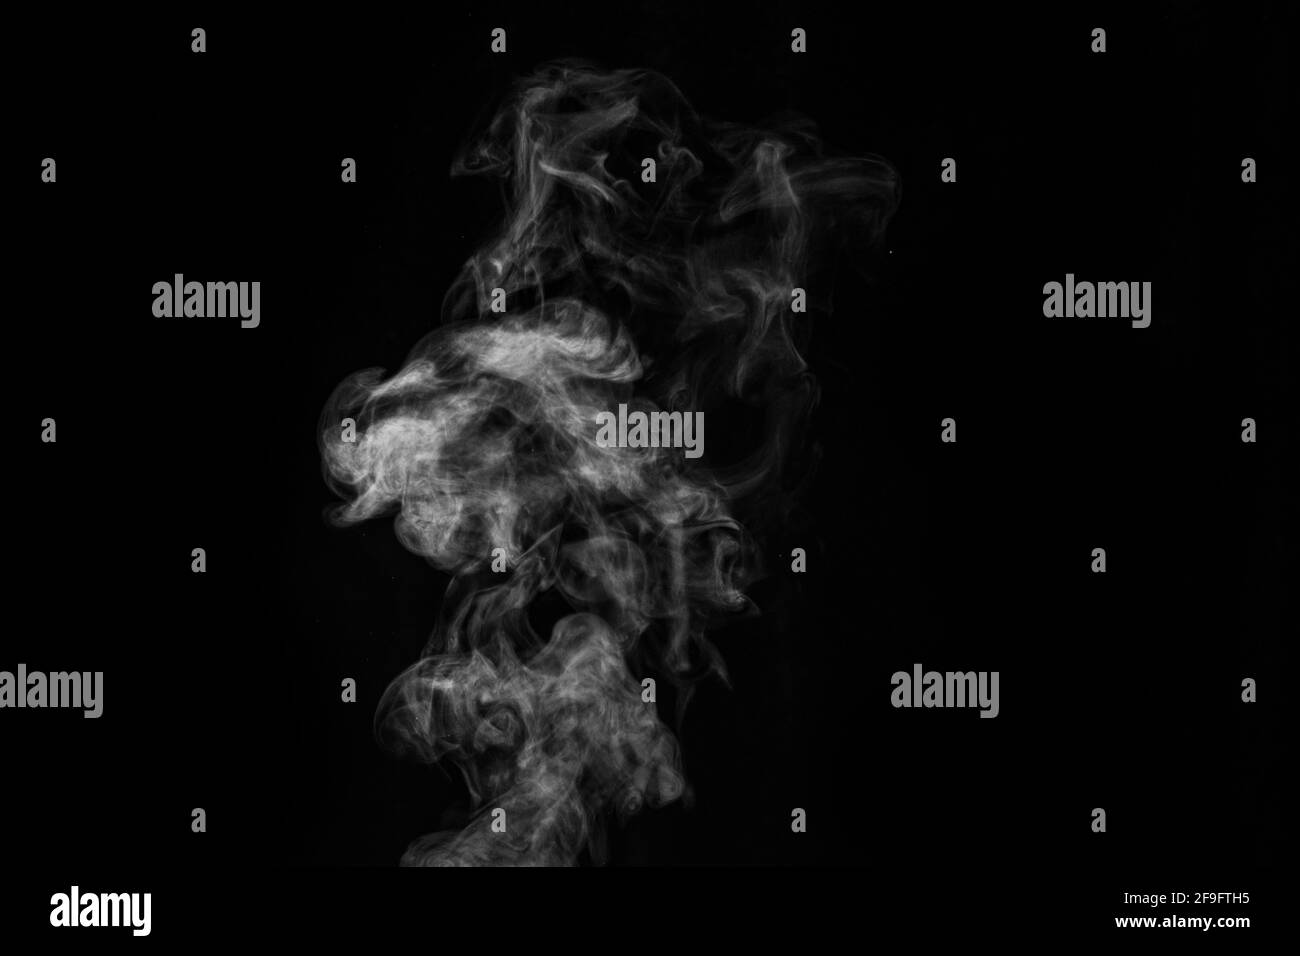 Smoke fragments on a black background. Abstract background, design element, for overlay on pictures. Stock Photo